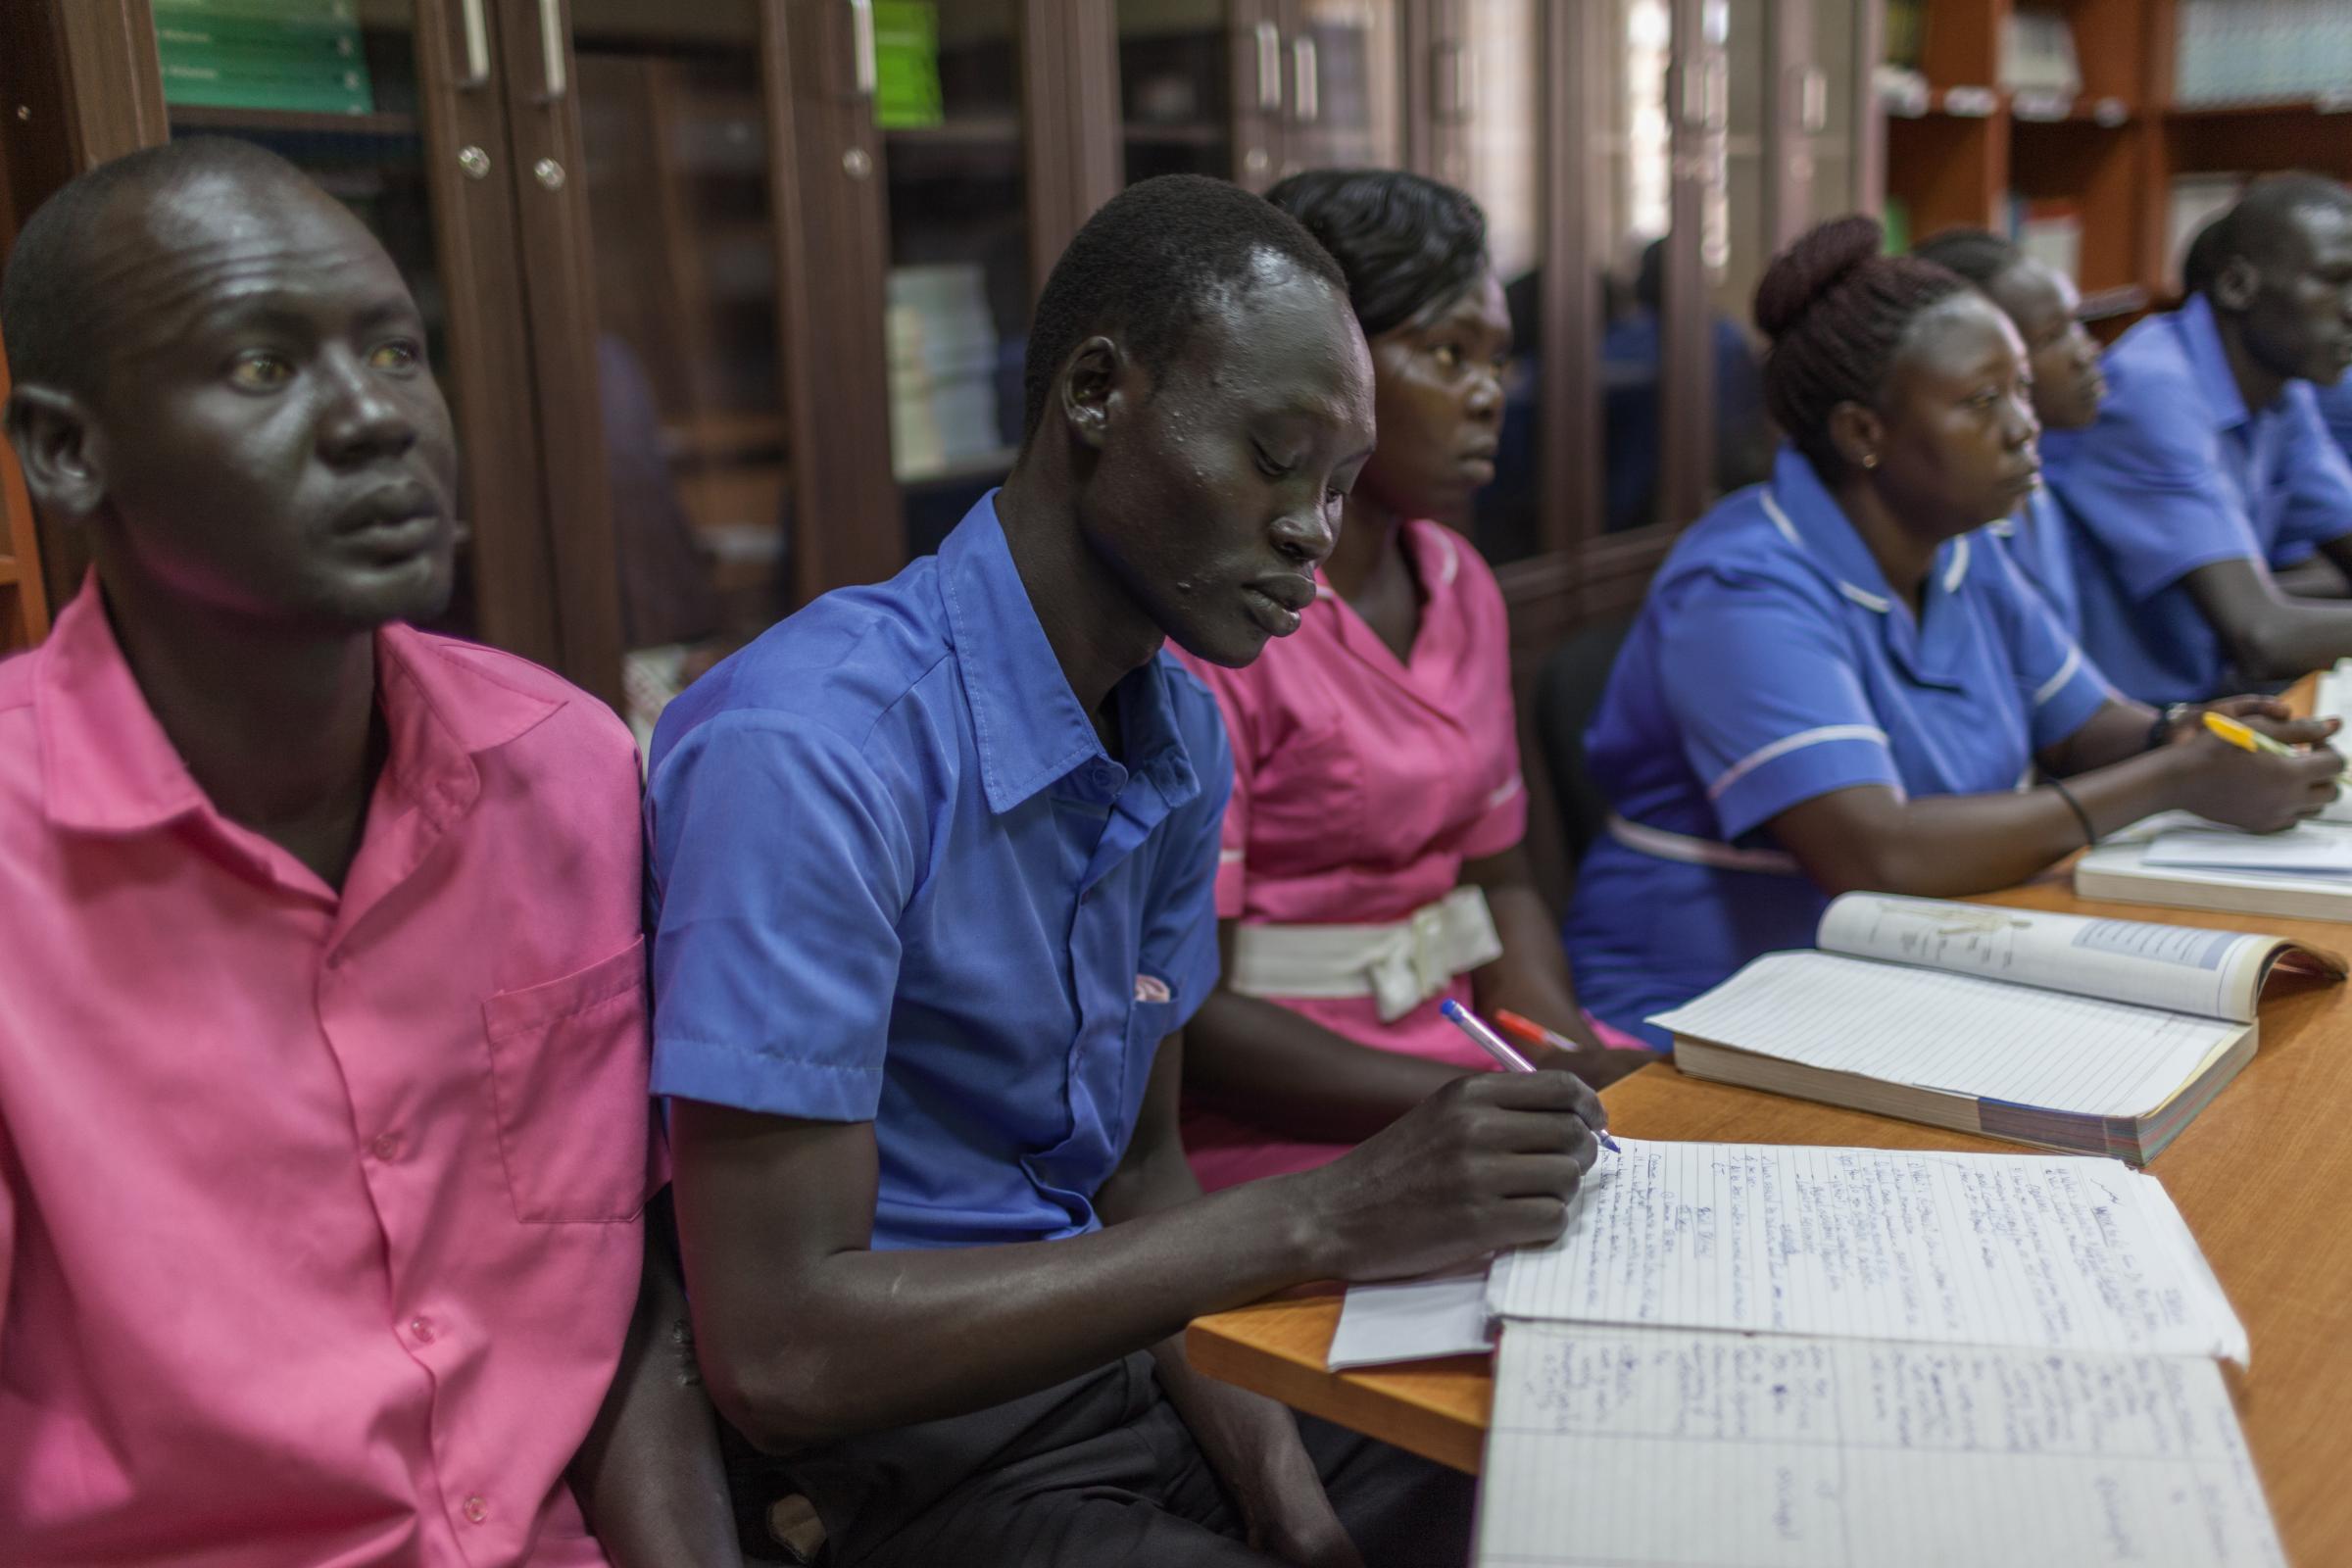 MIDWIVES: BRINGING HEALTH SERVICES CLOSER TO THE PEOPLE - Abraham Koang 29, from Jonglei State (left), Alier John Thon, 25 from Jonglei State (center), and...